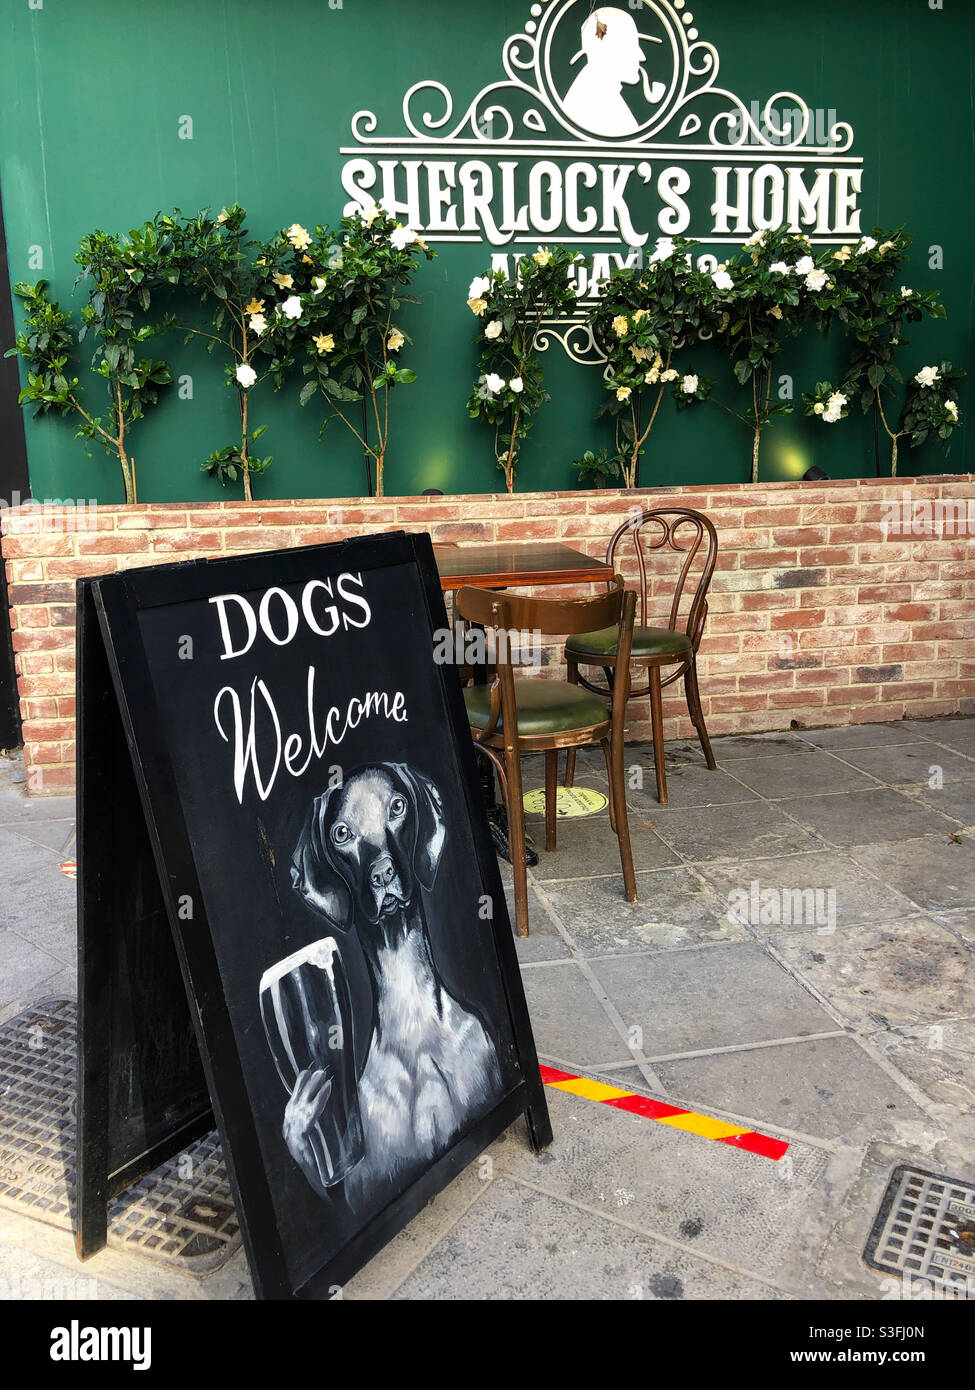 Dogs Welcome sign at Sherlock’s Home Bar and restaurant, Limassol Cyprus. Stock Photo